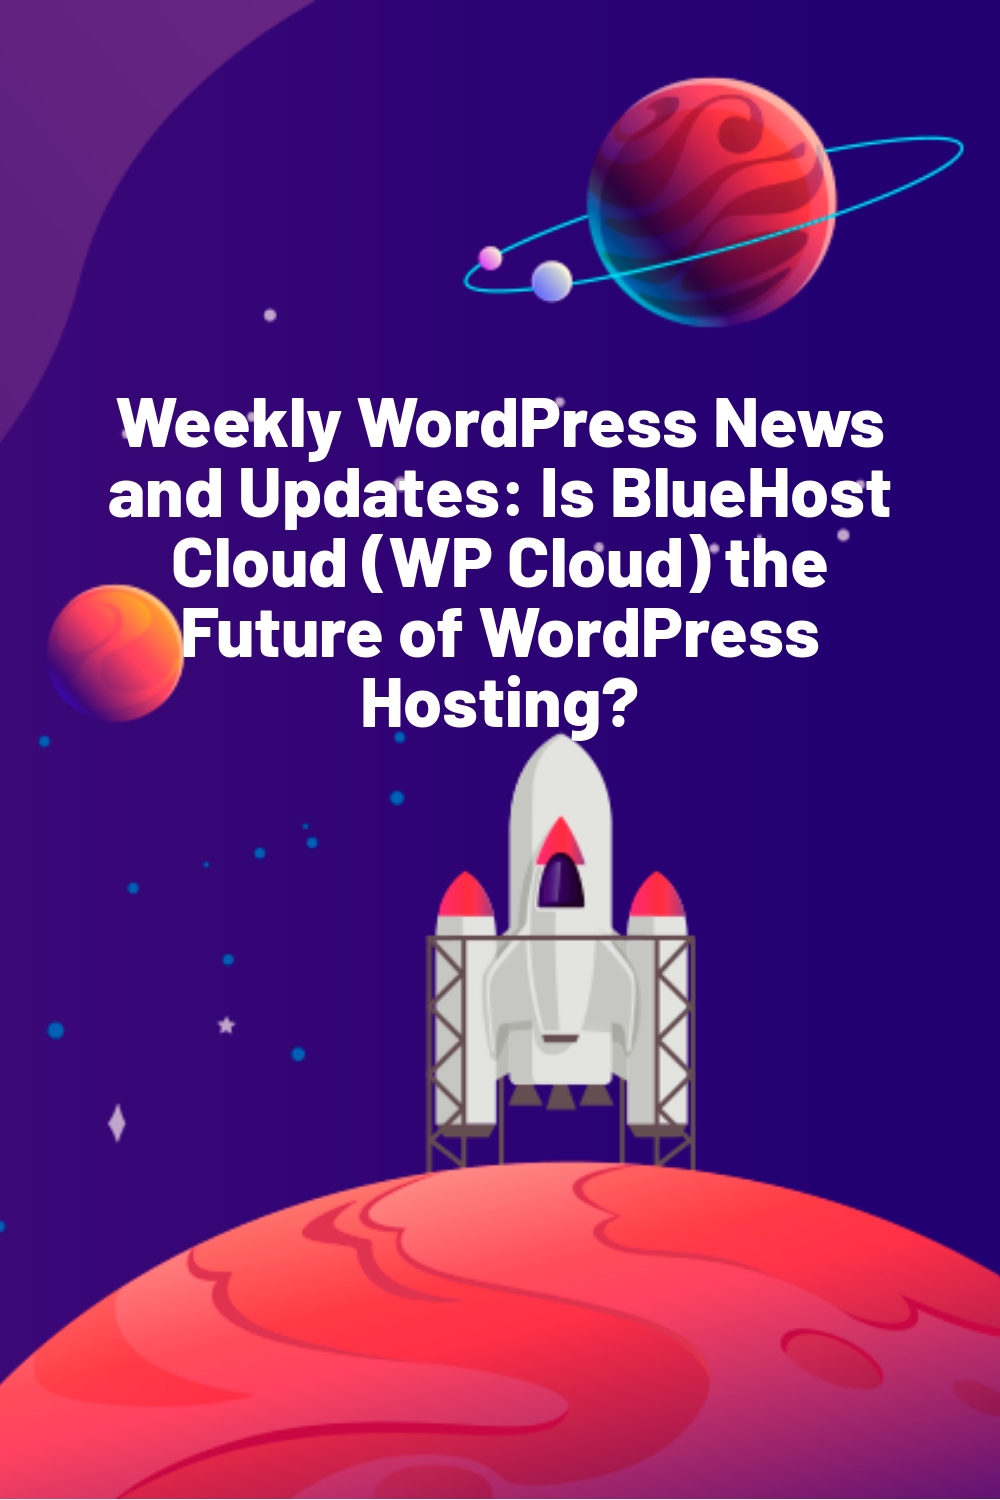 Weekly WordPress News and Updates: Is BlueHost Cloud (WP Cloud) the Future of WordPress Hosting?